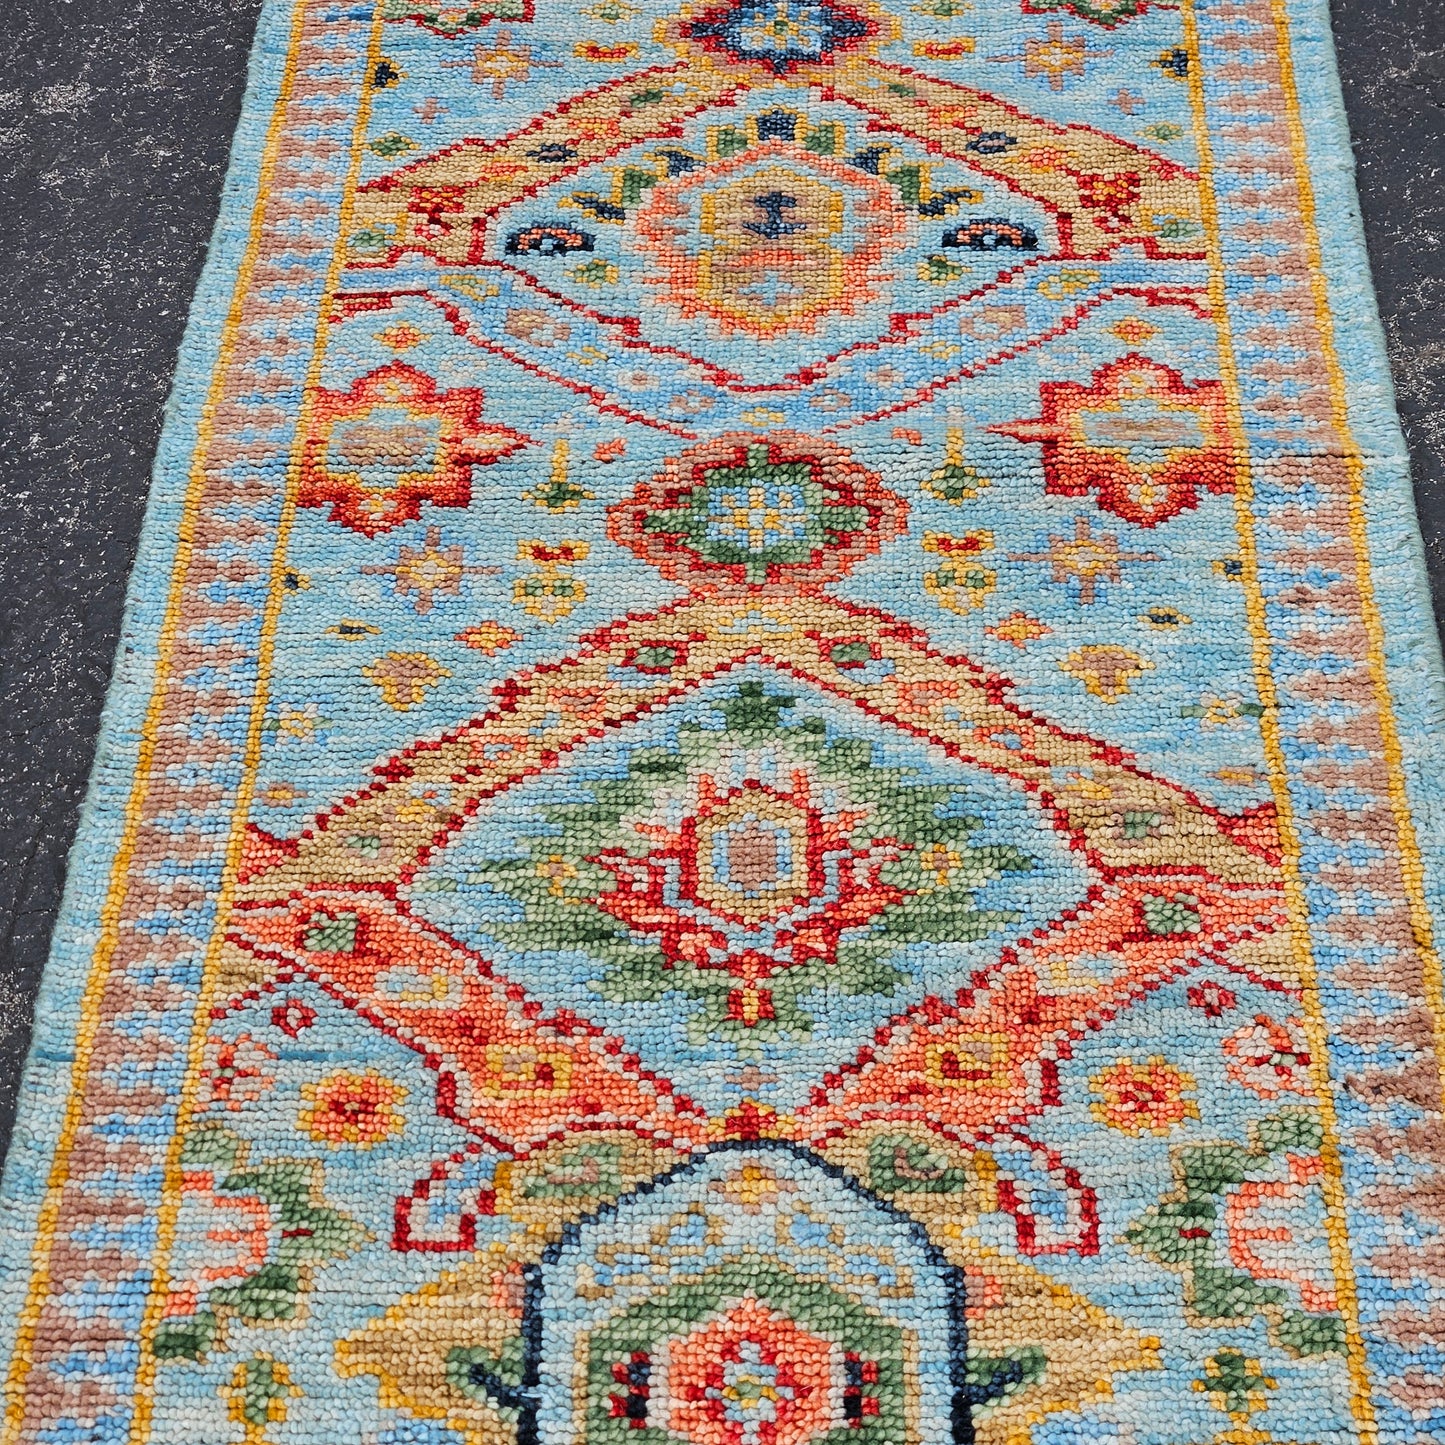 100% Wool Hand Knotted Beautiful Multi Colored Runner Rug / Carpet- 2' 6" x 7' 11"